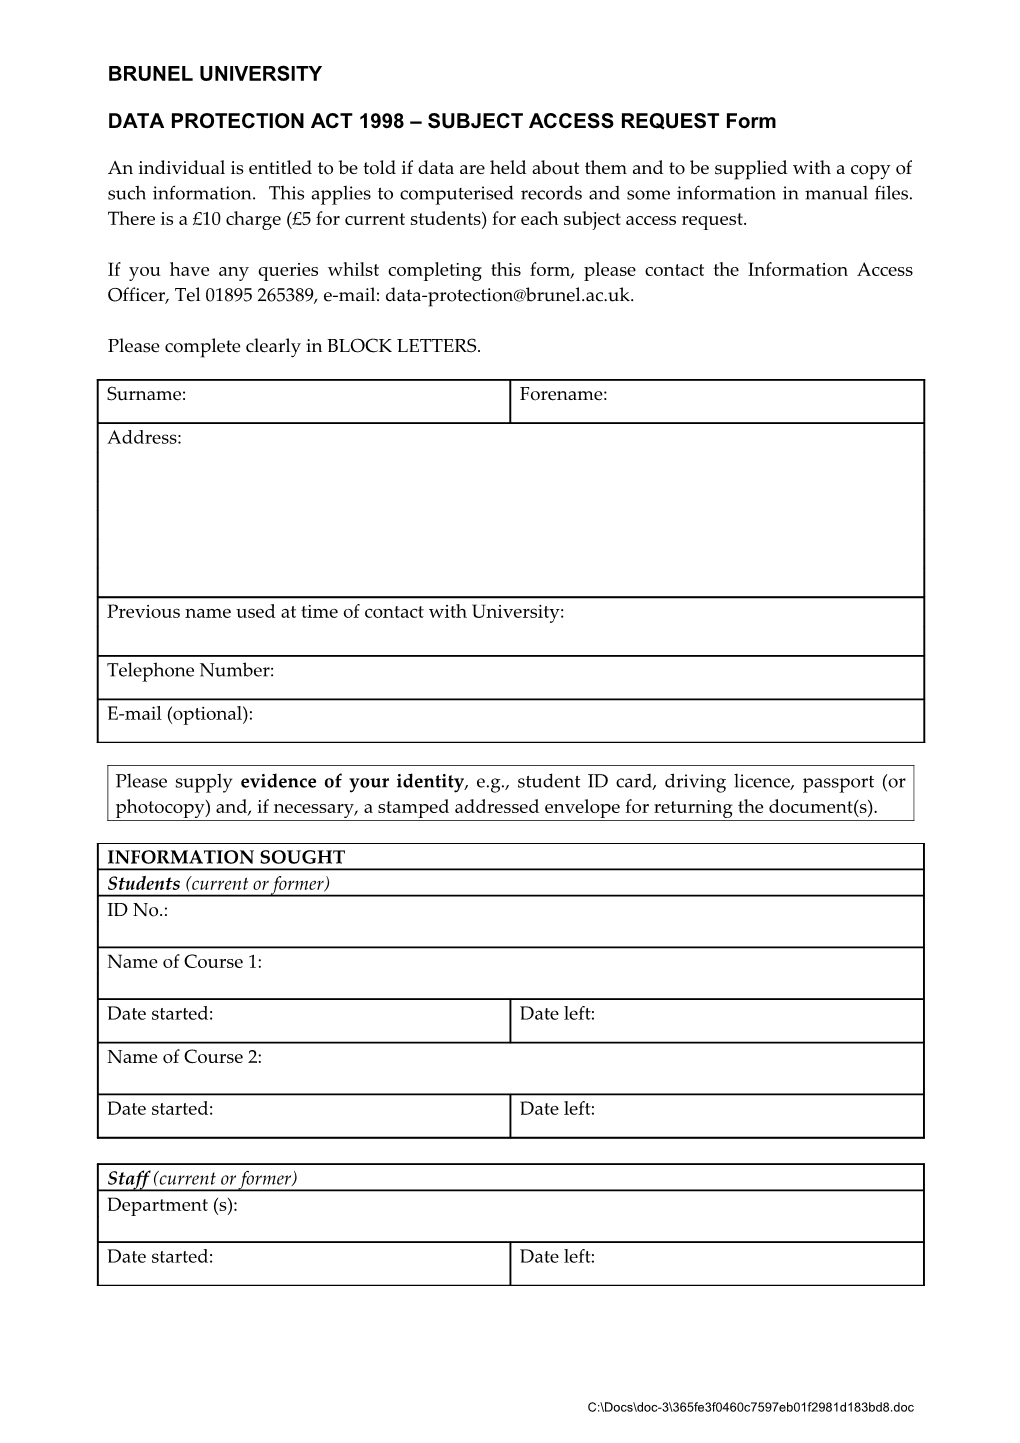 DATA PROTECTION ACT 1998 SUBJECT ACCESS REQUEST Form